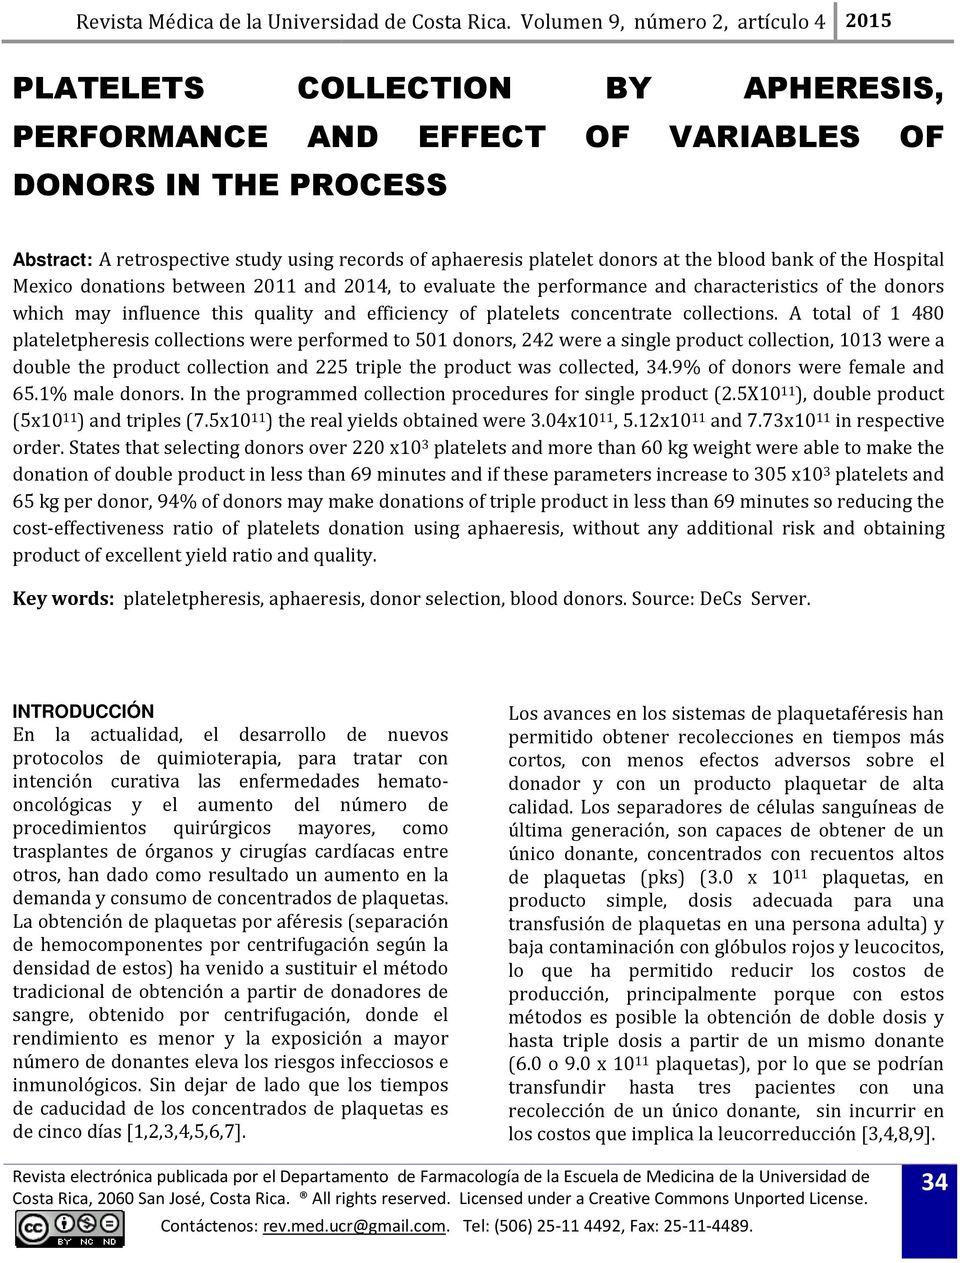 A total of 1 480 plateletpheresis collections were performed to 501 donors, 242 were a single product collection, 1013 were a double the product collection and 225 triple the product was collected,